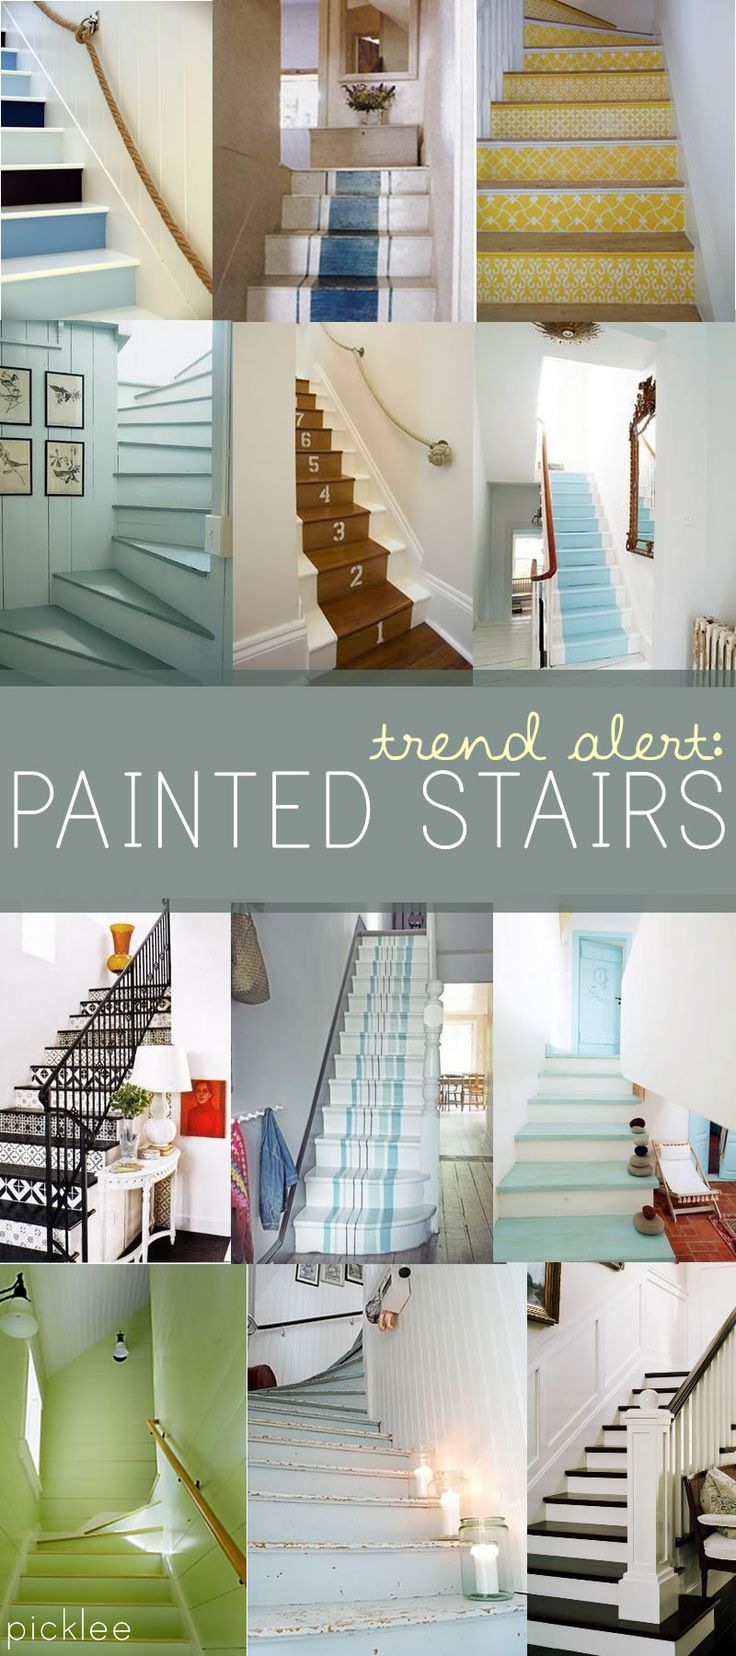 23+ Pretty Painted Stairs Ideas to Inspire your Home